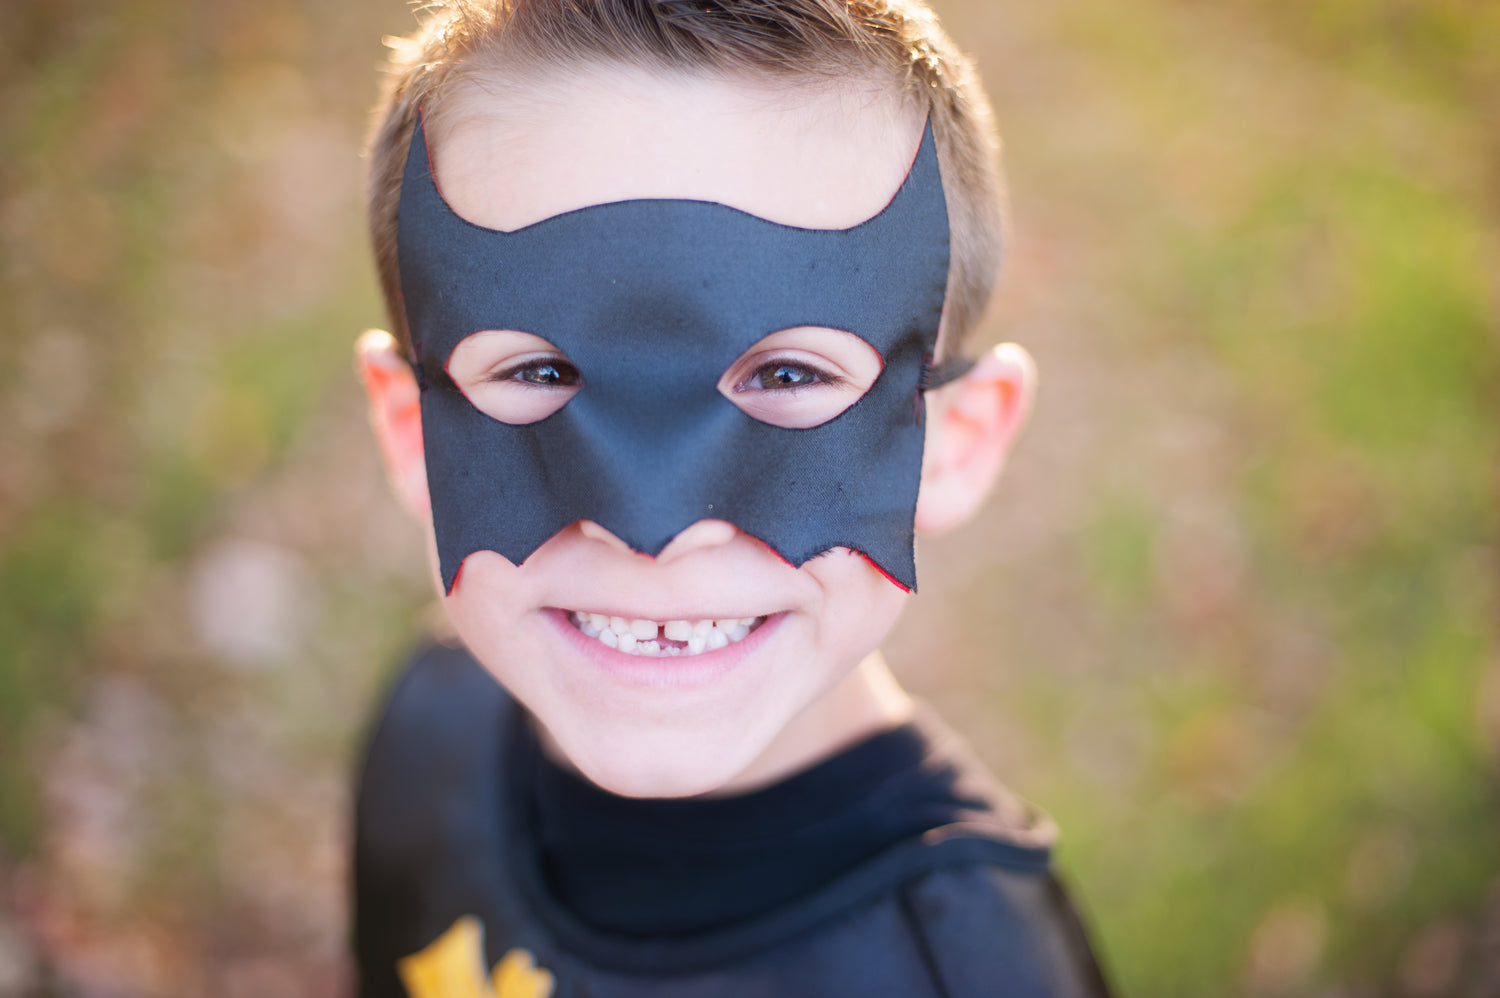 Our favourite School-Friendly Halloween costumes for kids!